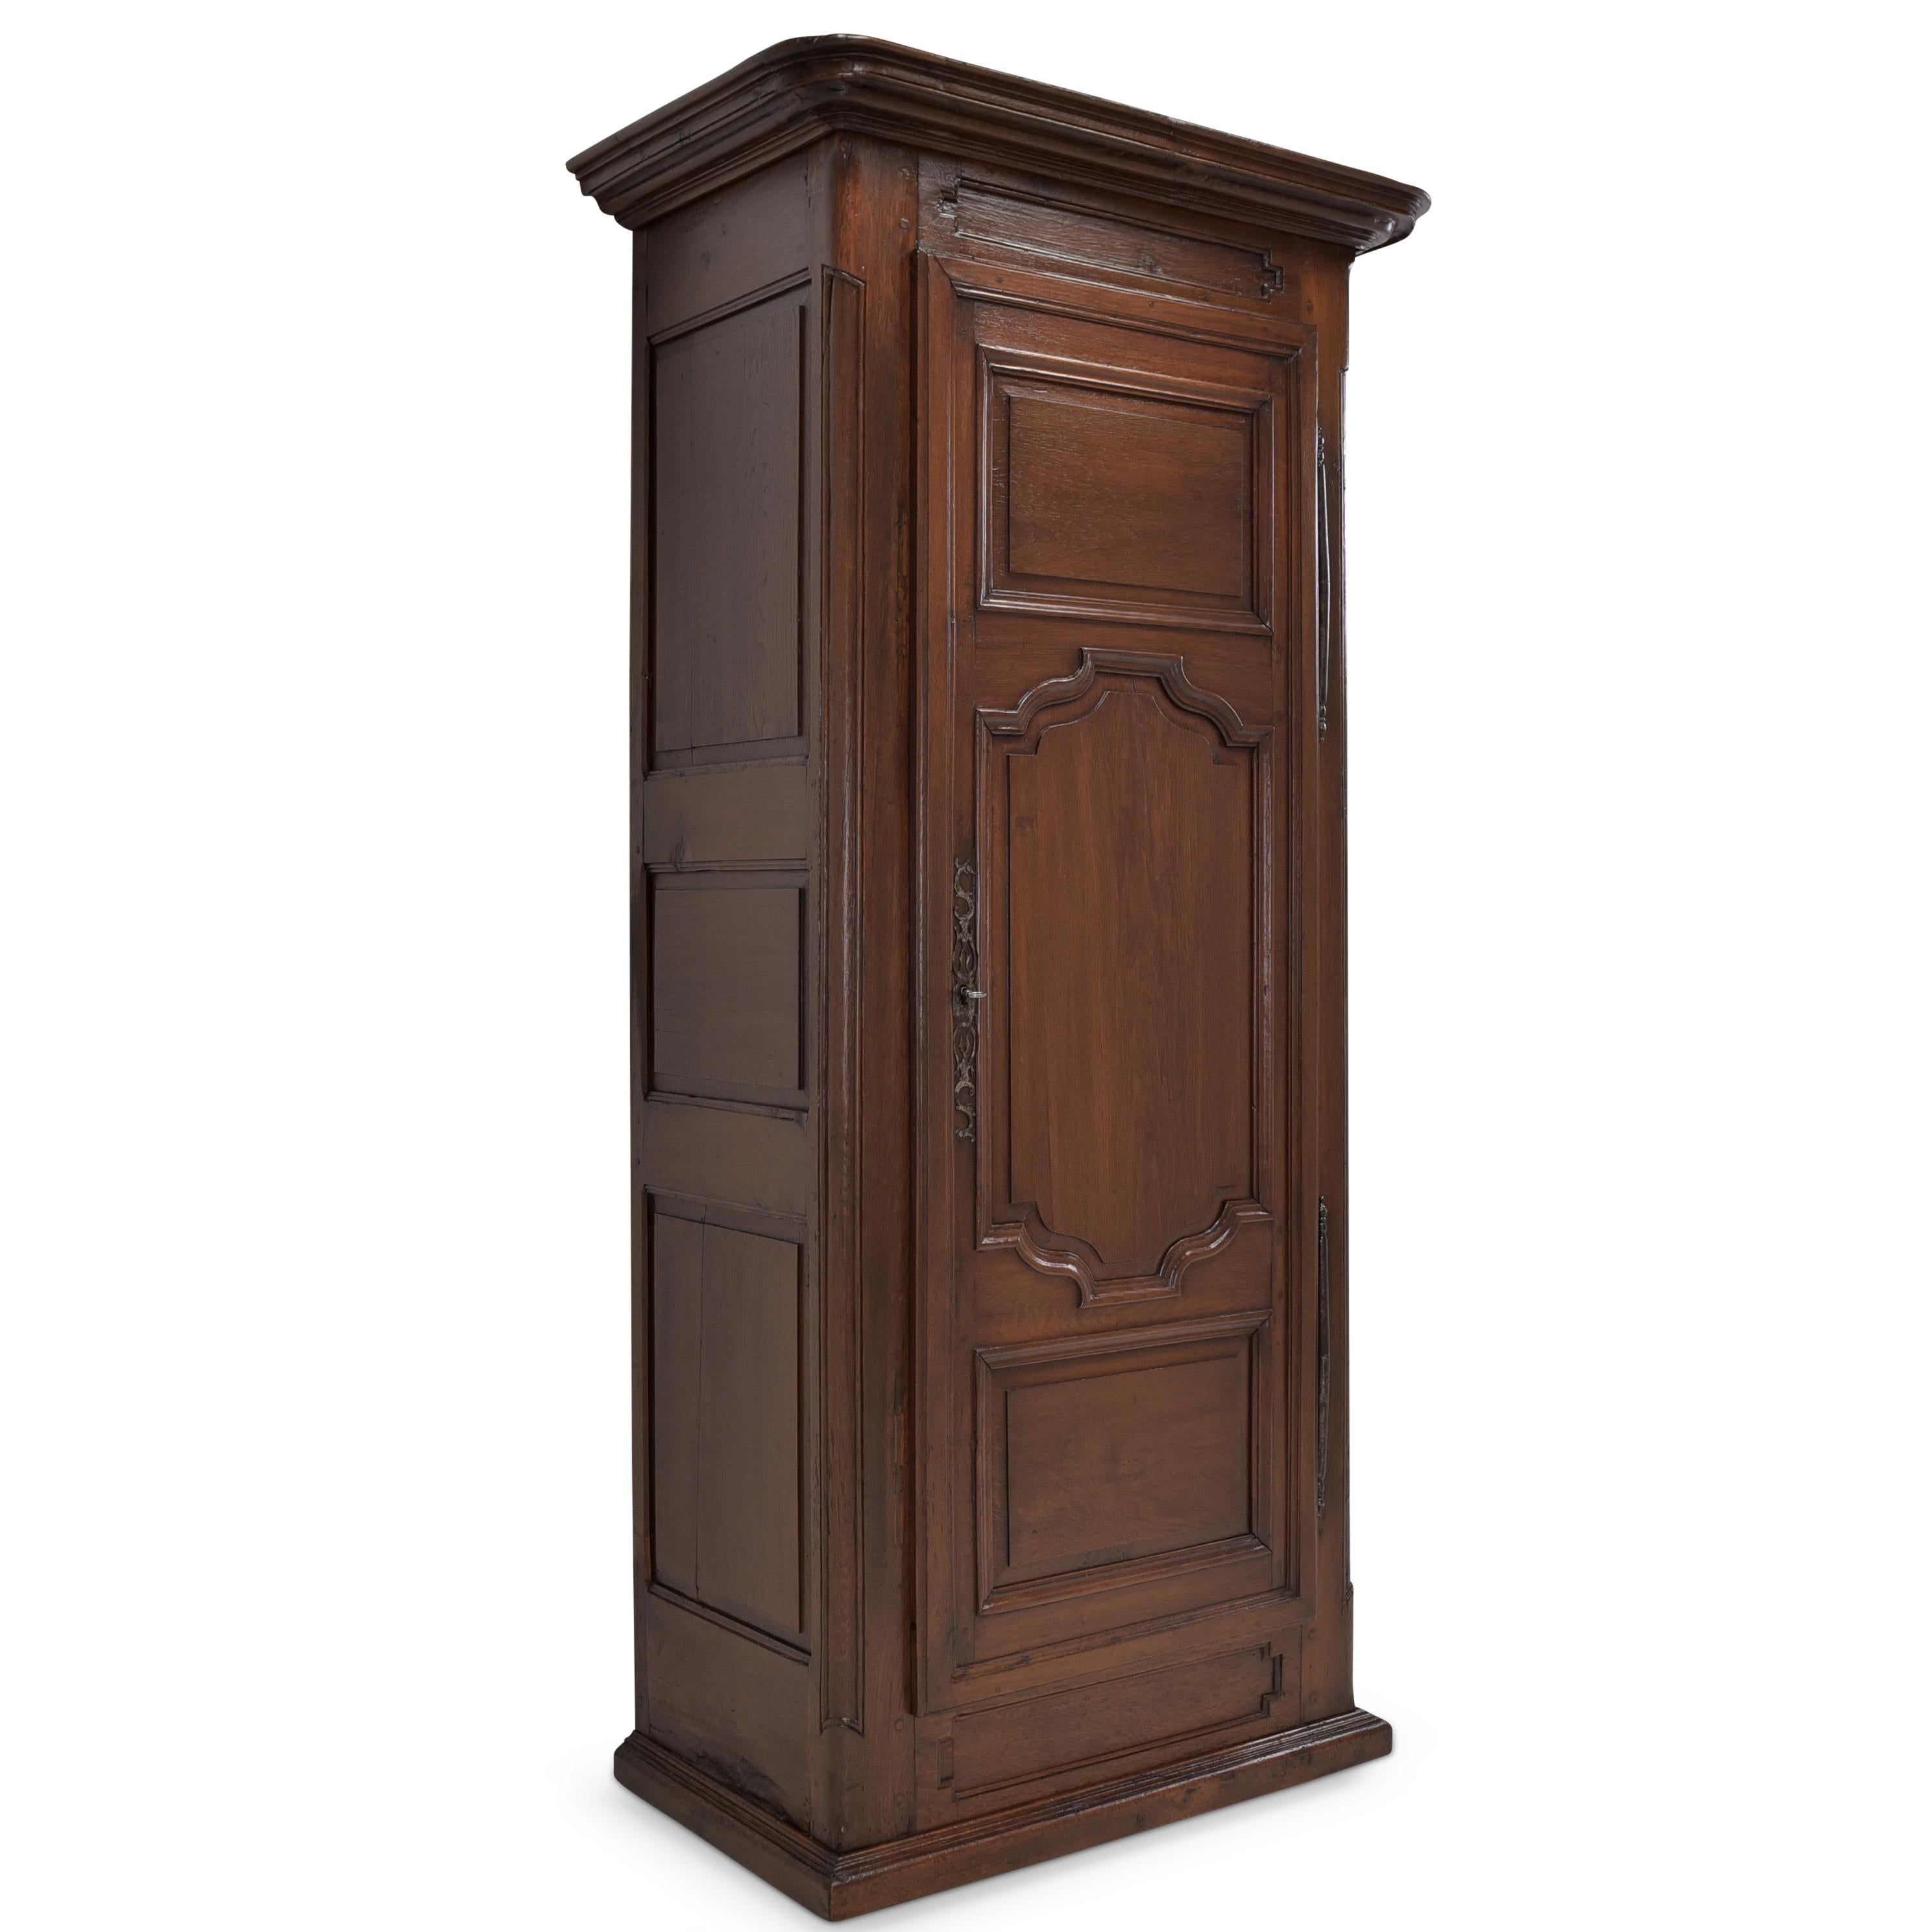 Narrow oak cabinet restored baroque around 1780 Oak hall cabinet

Features:
Shelves newly manufactured in solid softwood
Narrow, single-door model with three shelves
High quality
Heavy quality
Cassette fillings
Original door hinges
Castle